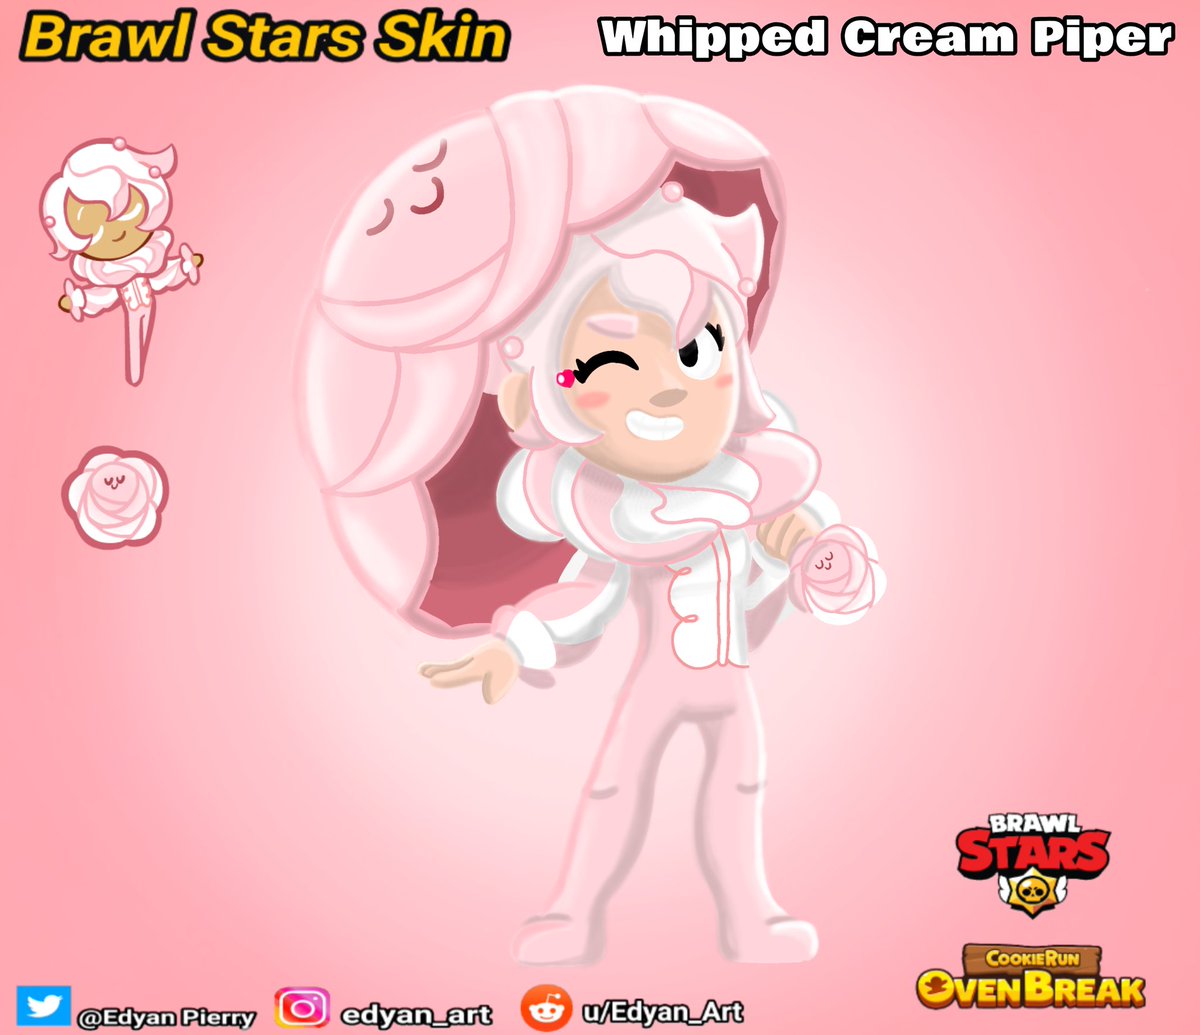 Edyan Art On Twitter Brawl Stars X Cookie Run Skin For Piper Brawlstars Based On The Character Whipped Cream Cookie From The Game Cookierun Brawlart Brawlstarsfanart Brawlstarsart Brawlstarsskin Brawlstarspiper Cookierunovenbreak - brawl stars skim piper esqueleto